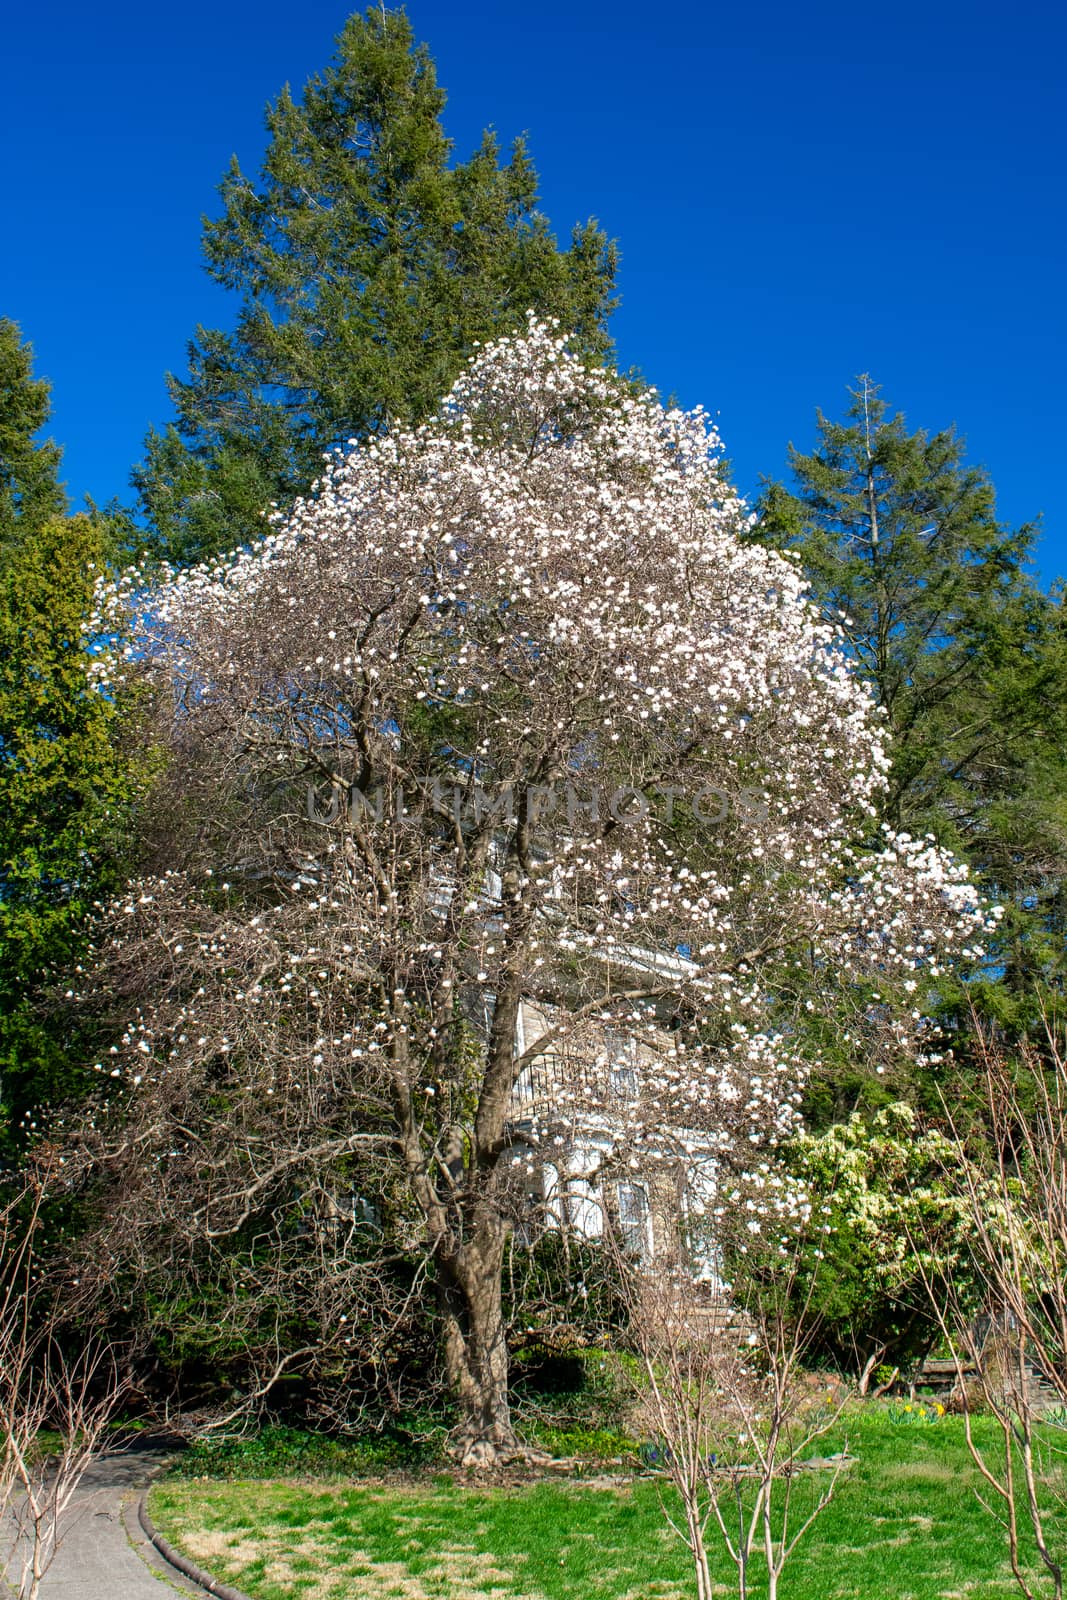 A Tree on a Suburban Front Yard With Blooming White Flowers by bju12290